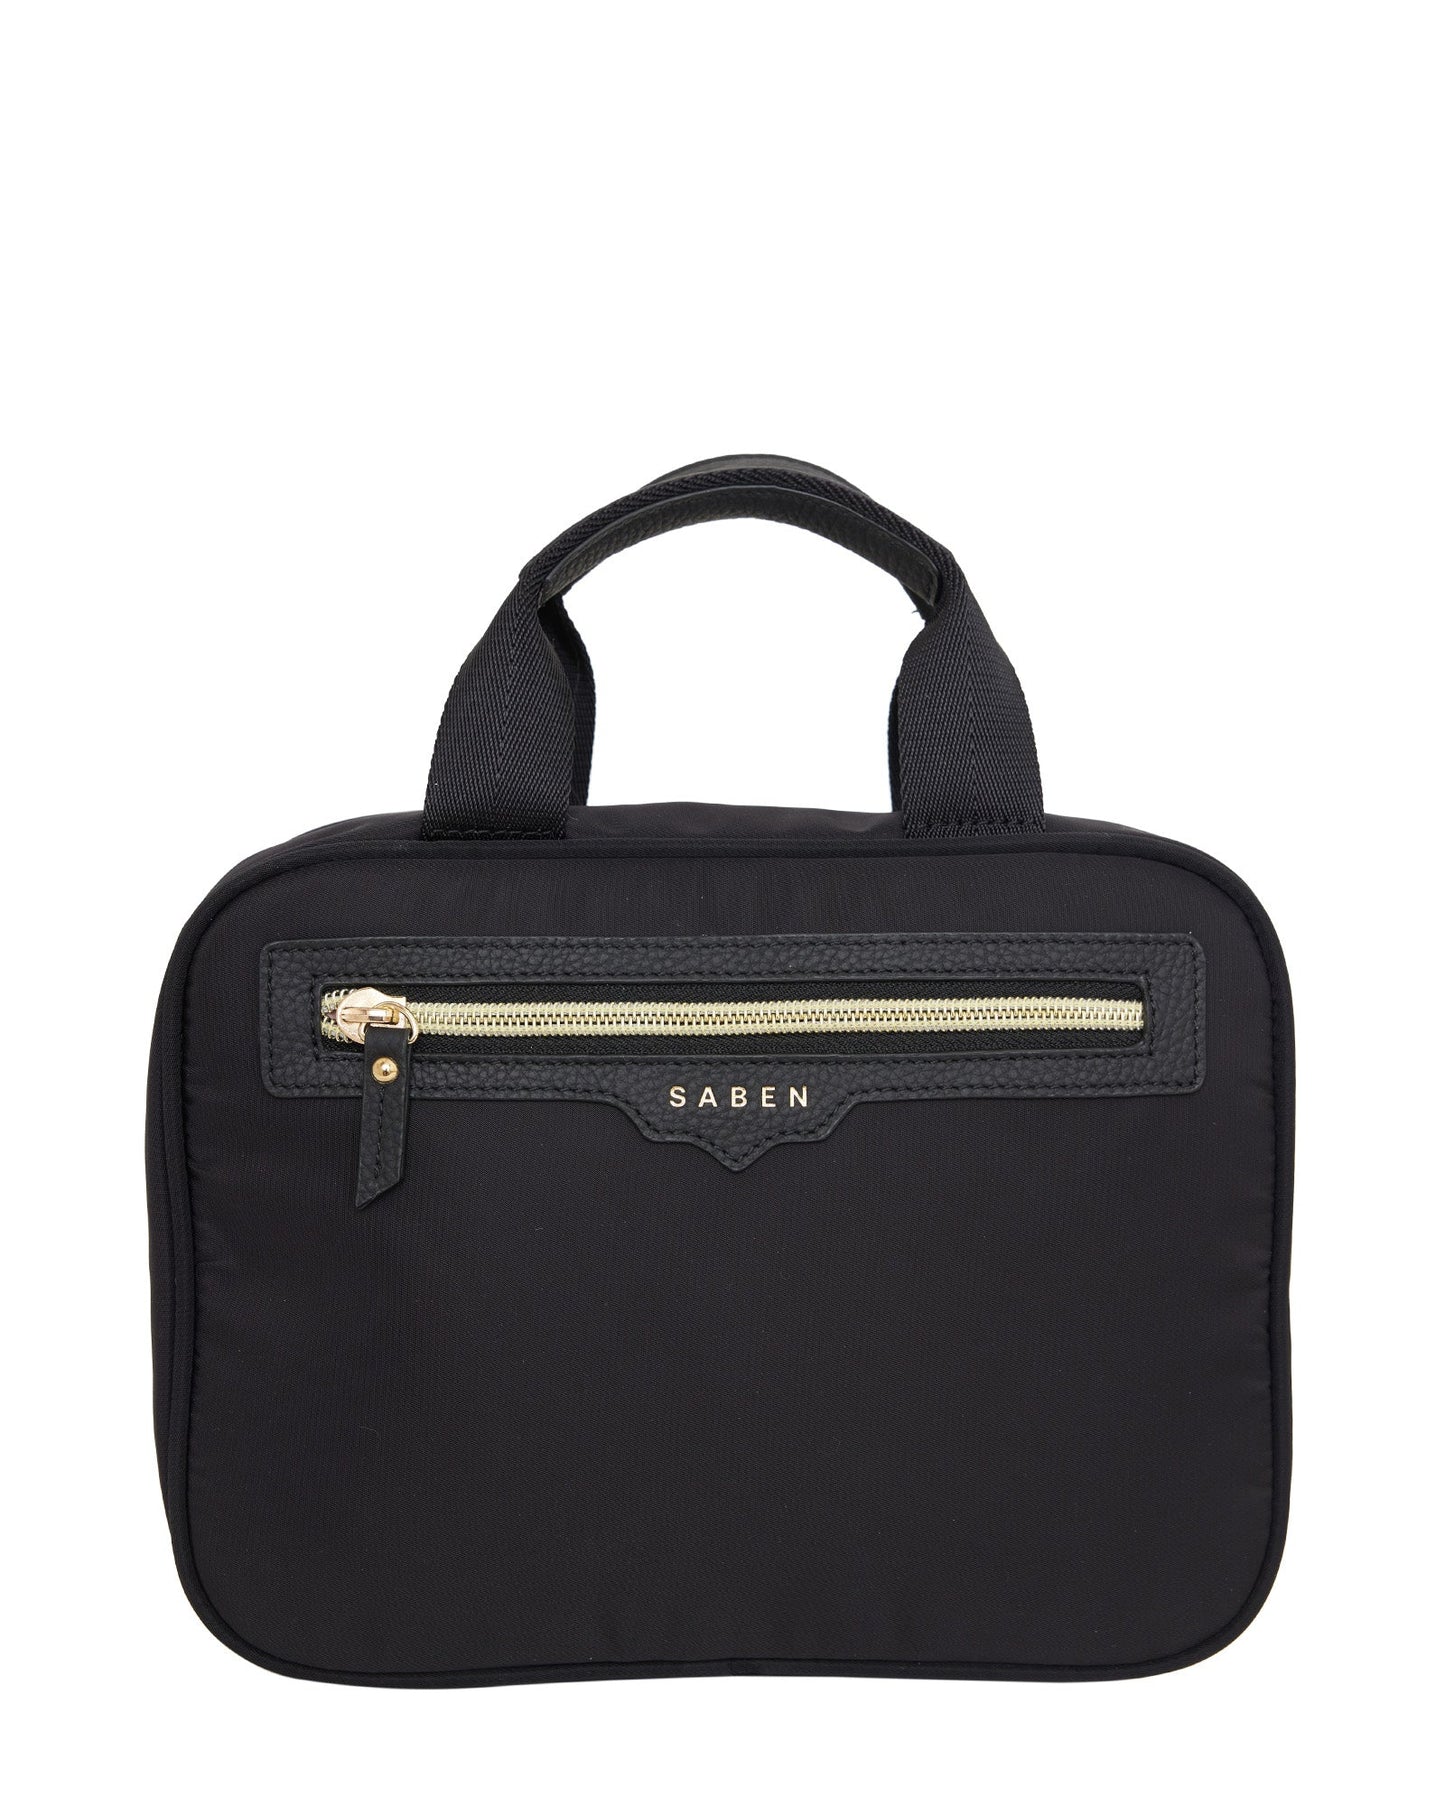 Tanner Toiletry Bag - Black and Chain Print